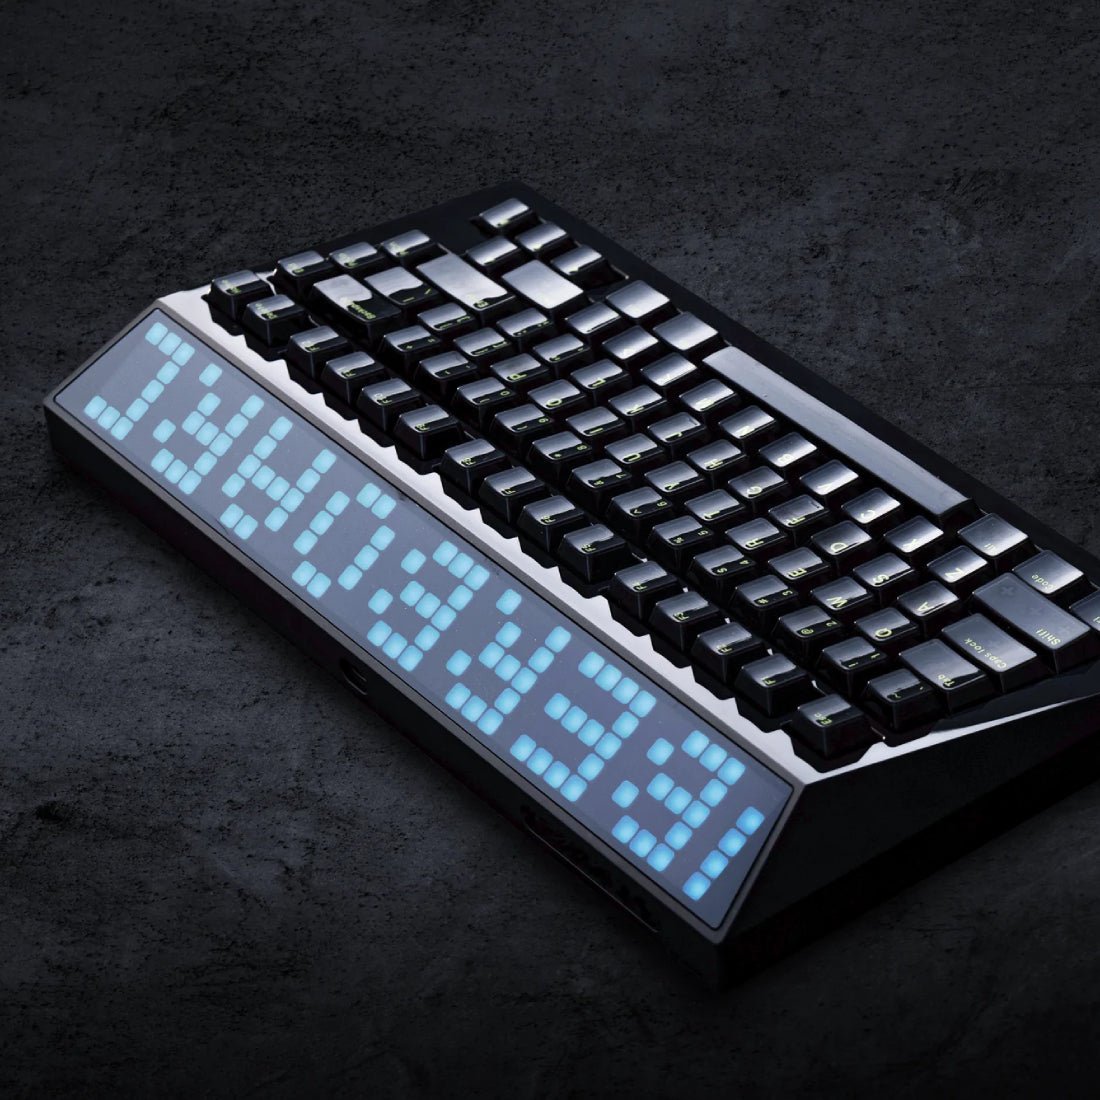 AngryMiao Cyberboard R2 Le Smoking Wireless Keyboard Limited Edition - Jet Black - Store 974 | ستور ٩٧٤